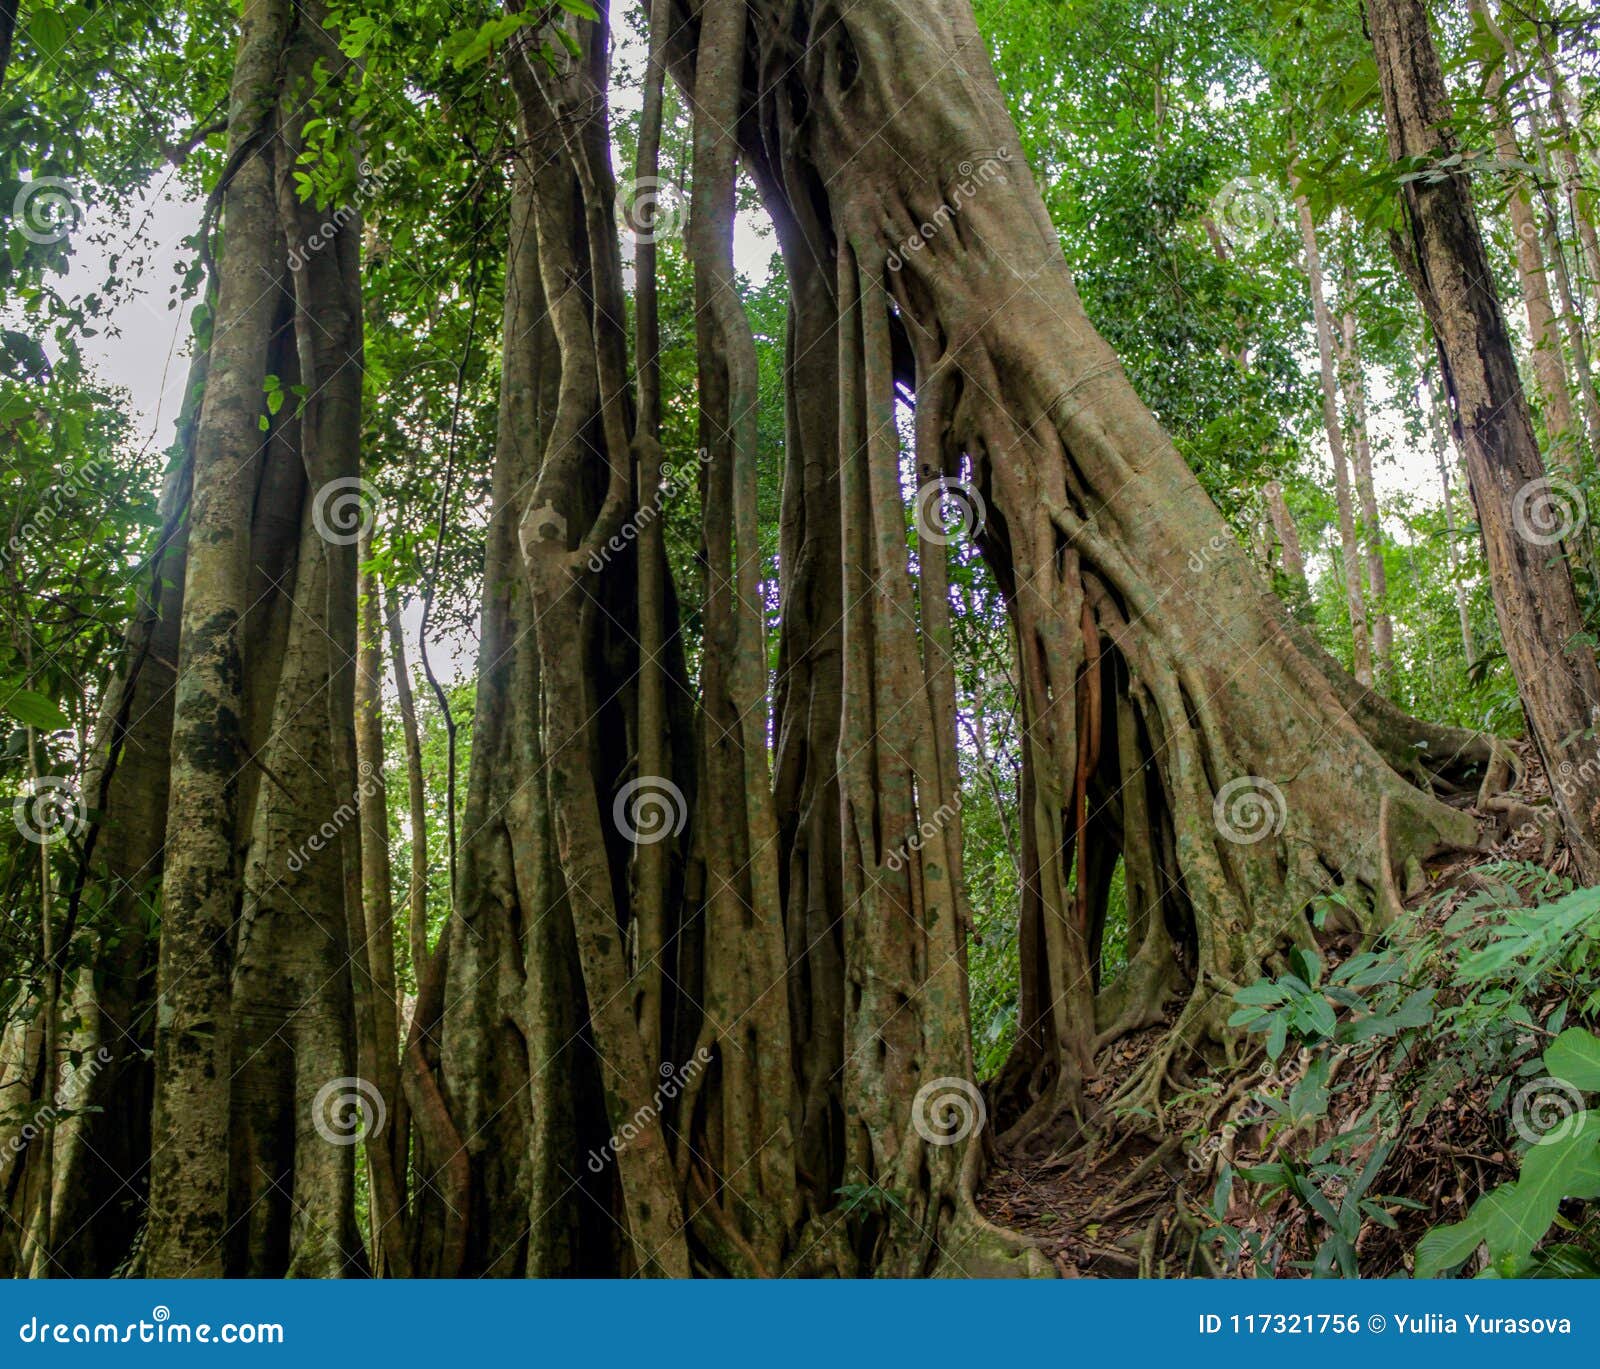 jungle forest tree banyan roots in tropical rainforest